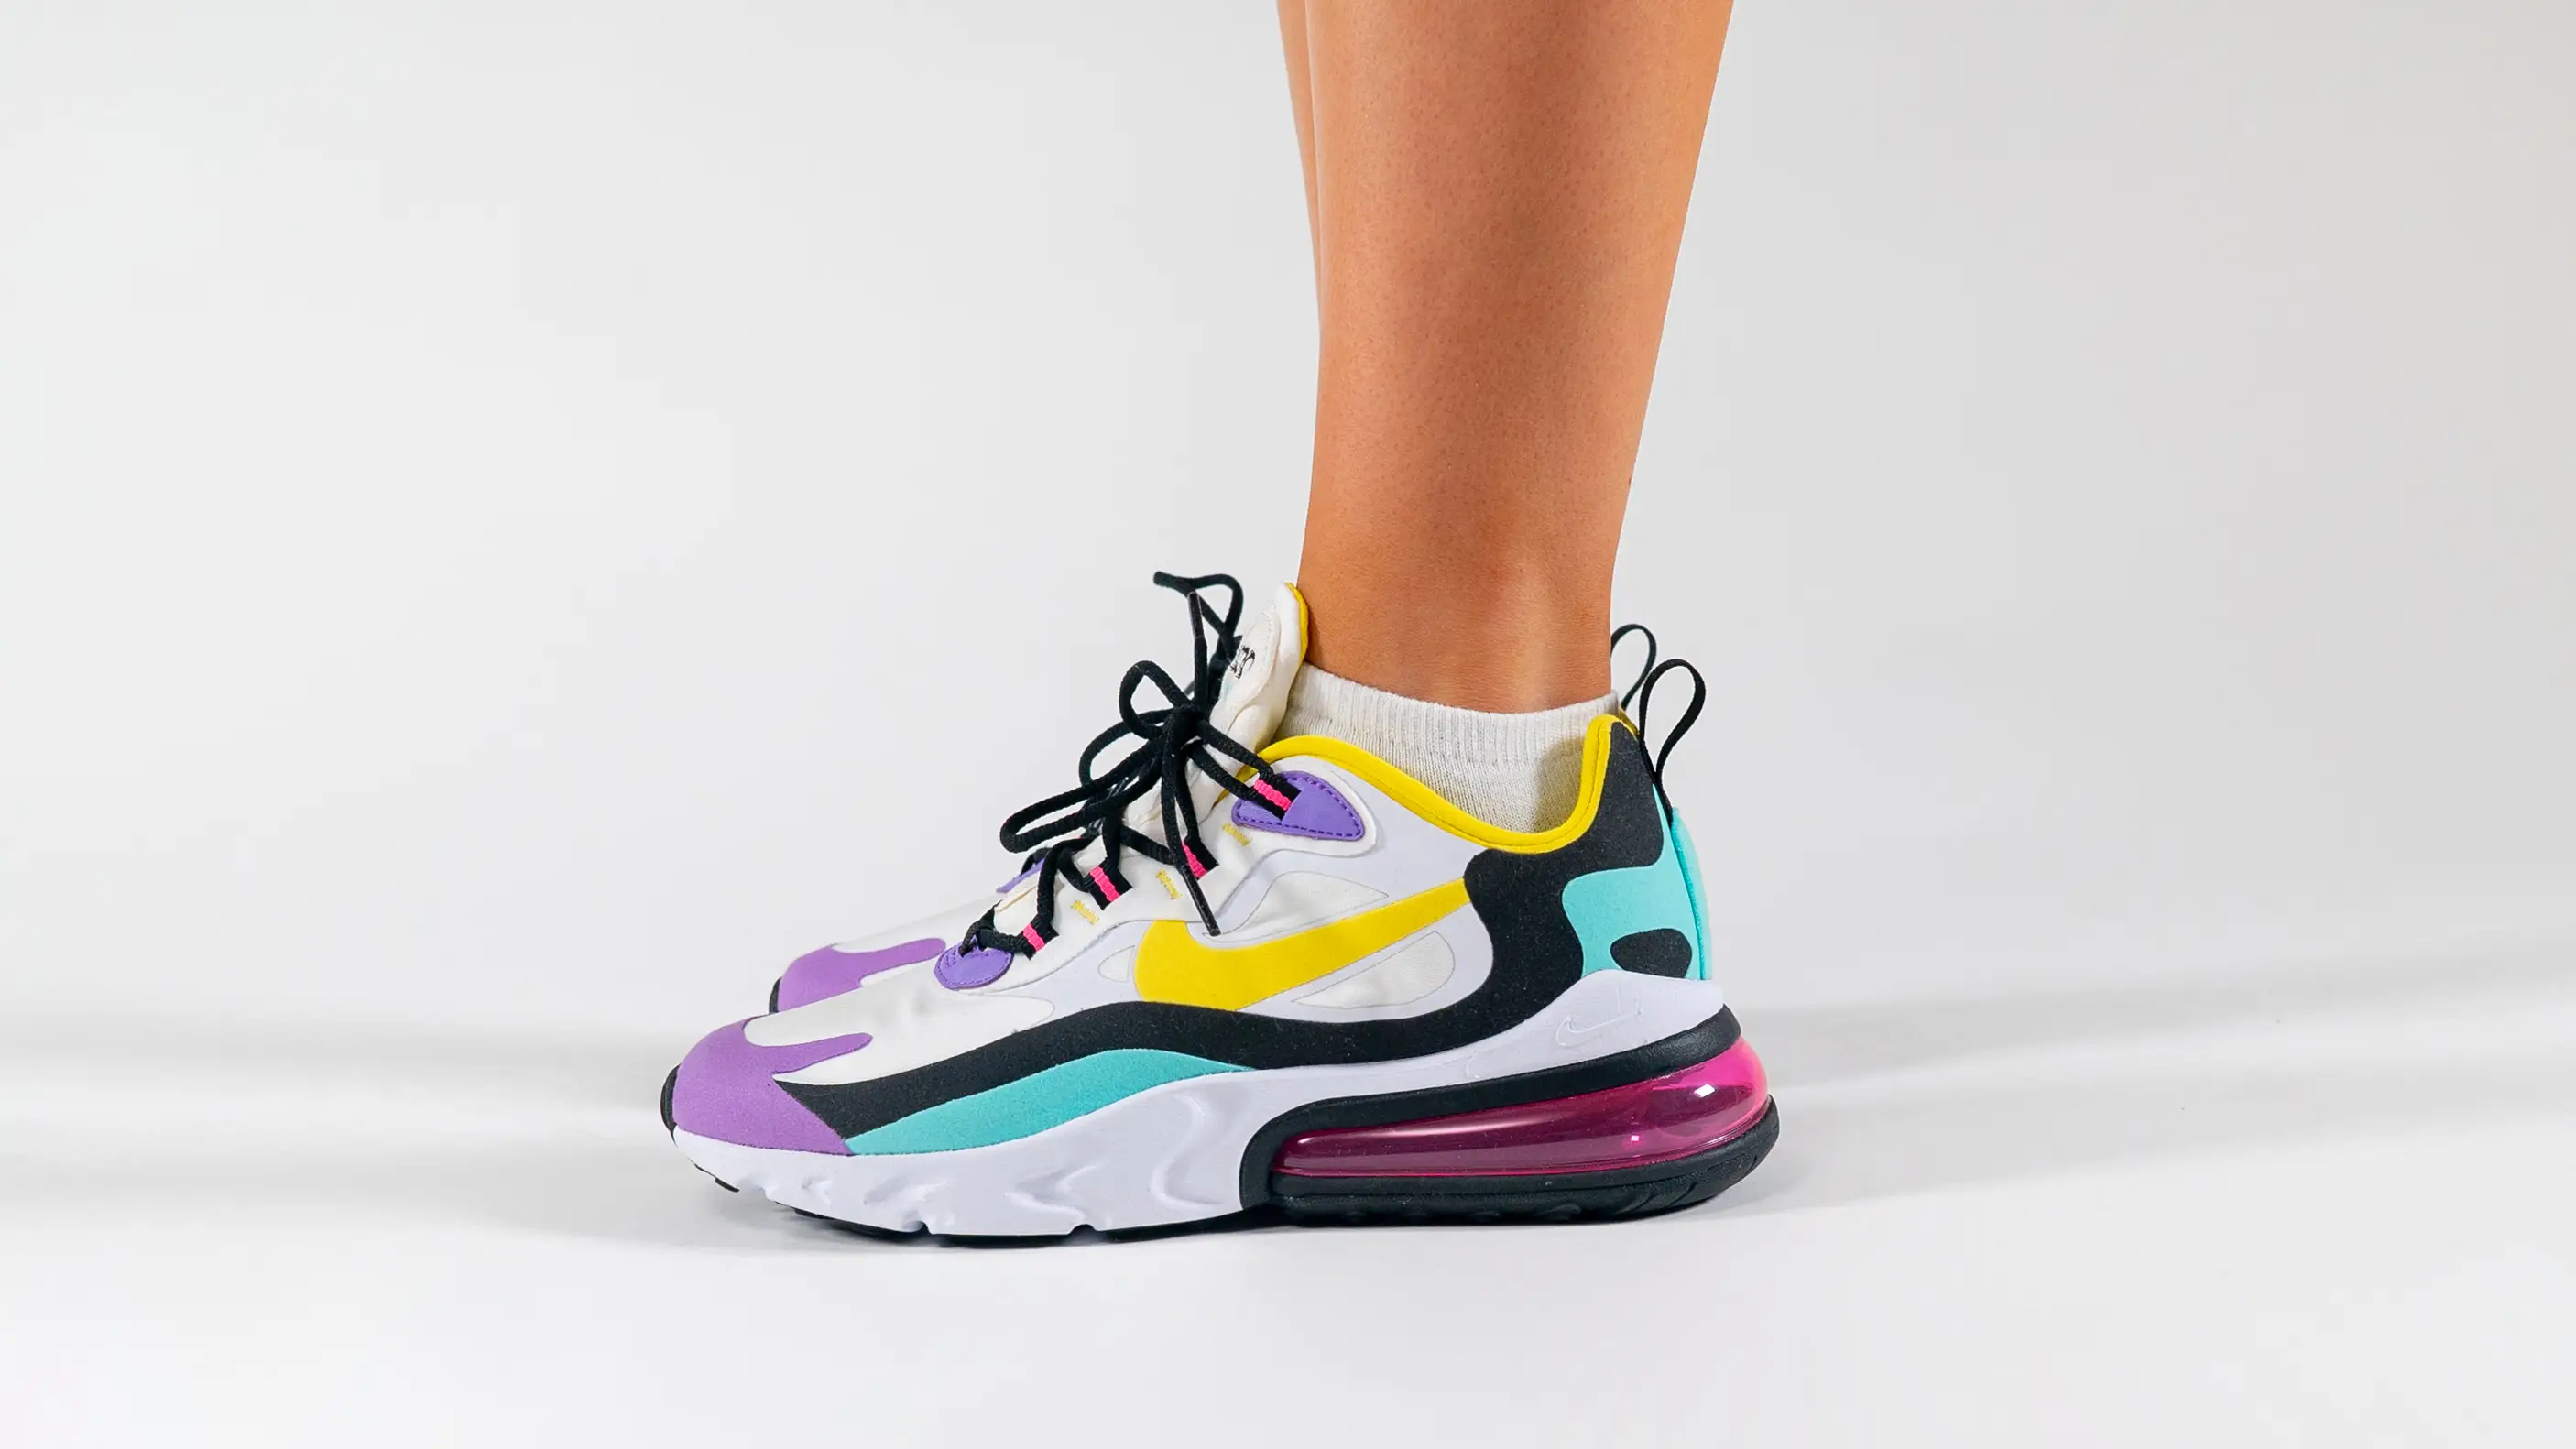 An Exclusive Look At The Nike Air Max 270 React 